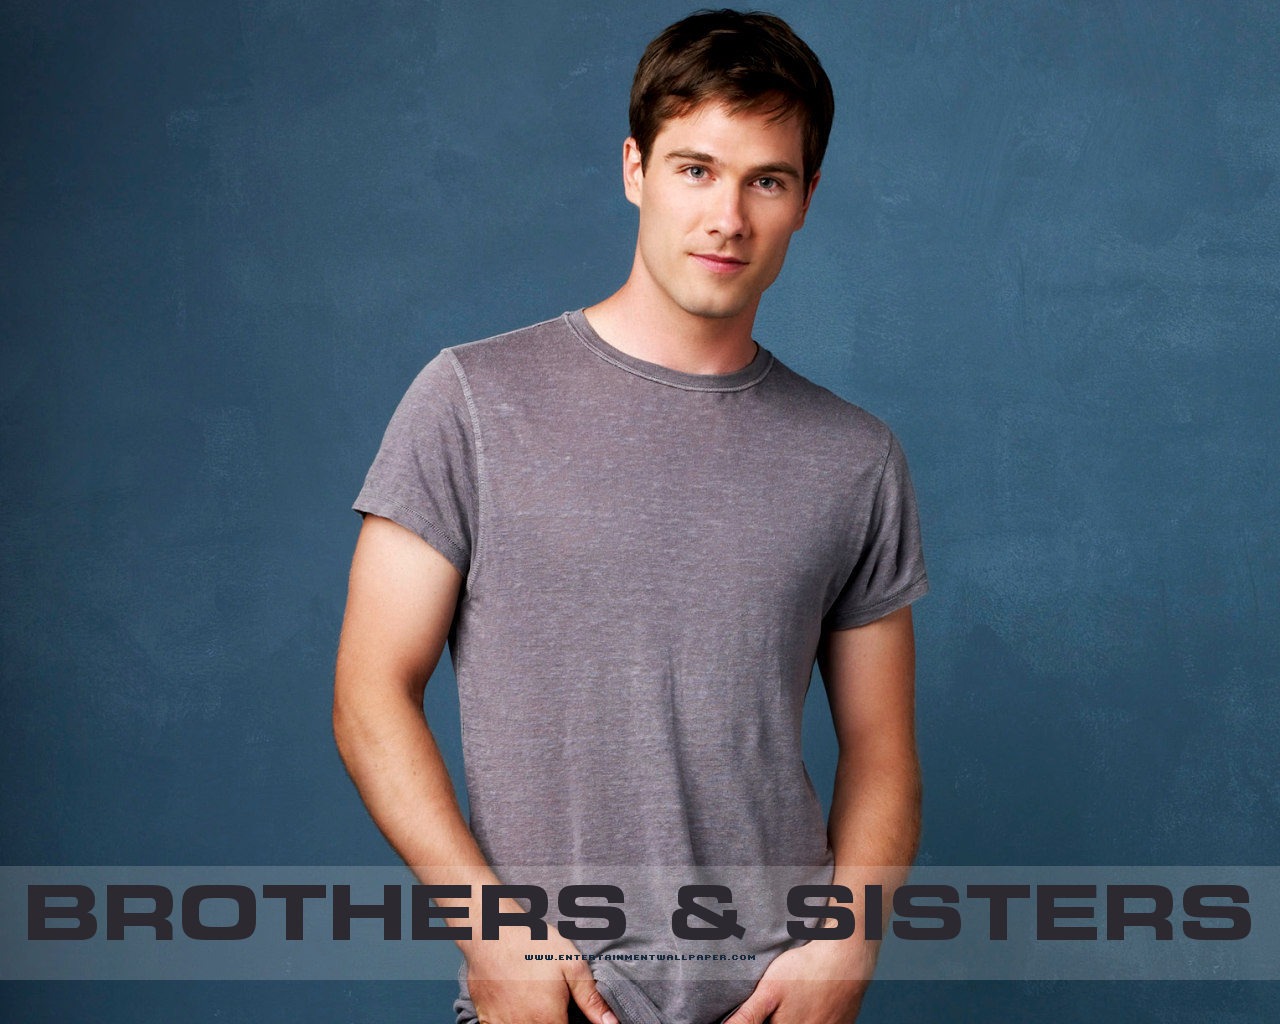 Brothers & Sisters wallpaper #20 - 1280x1024